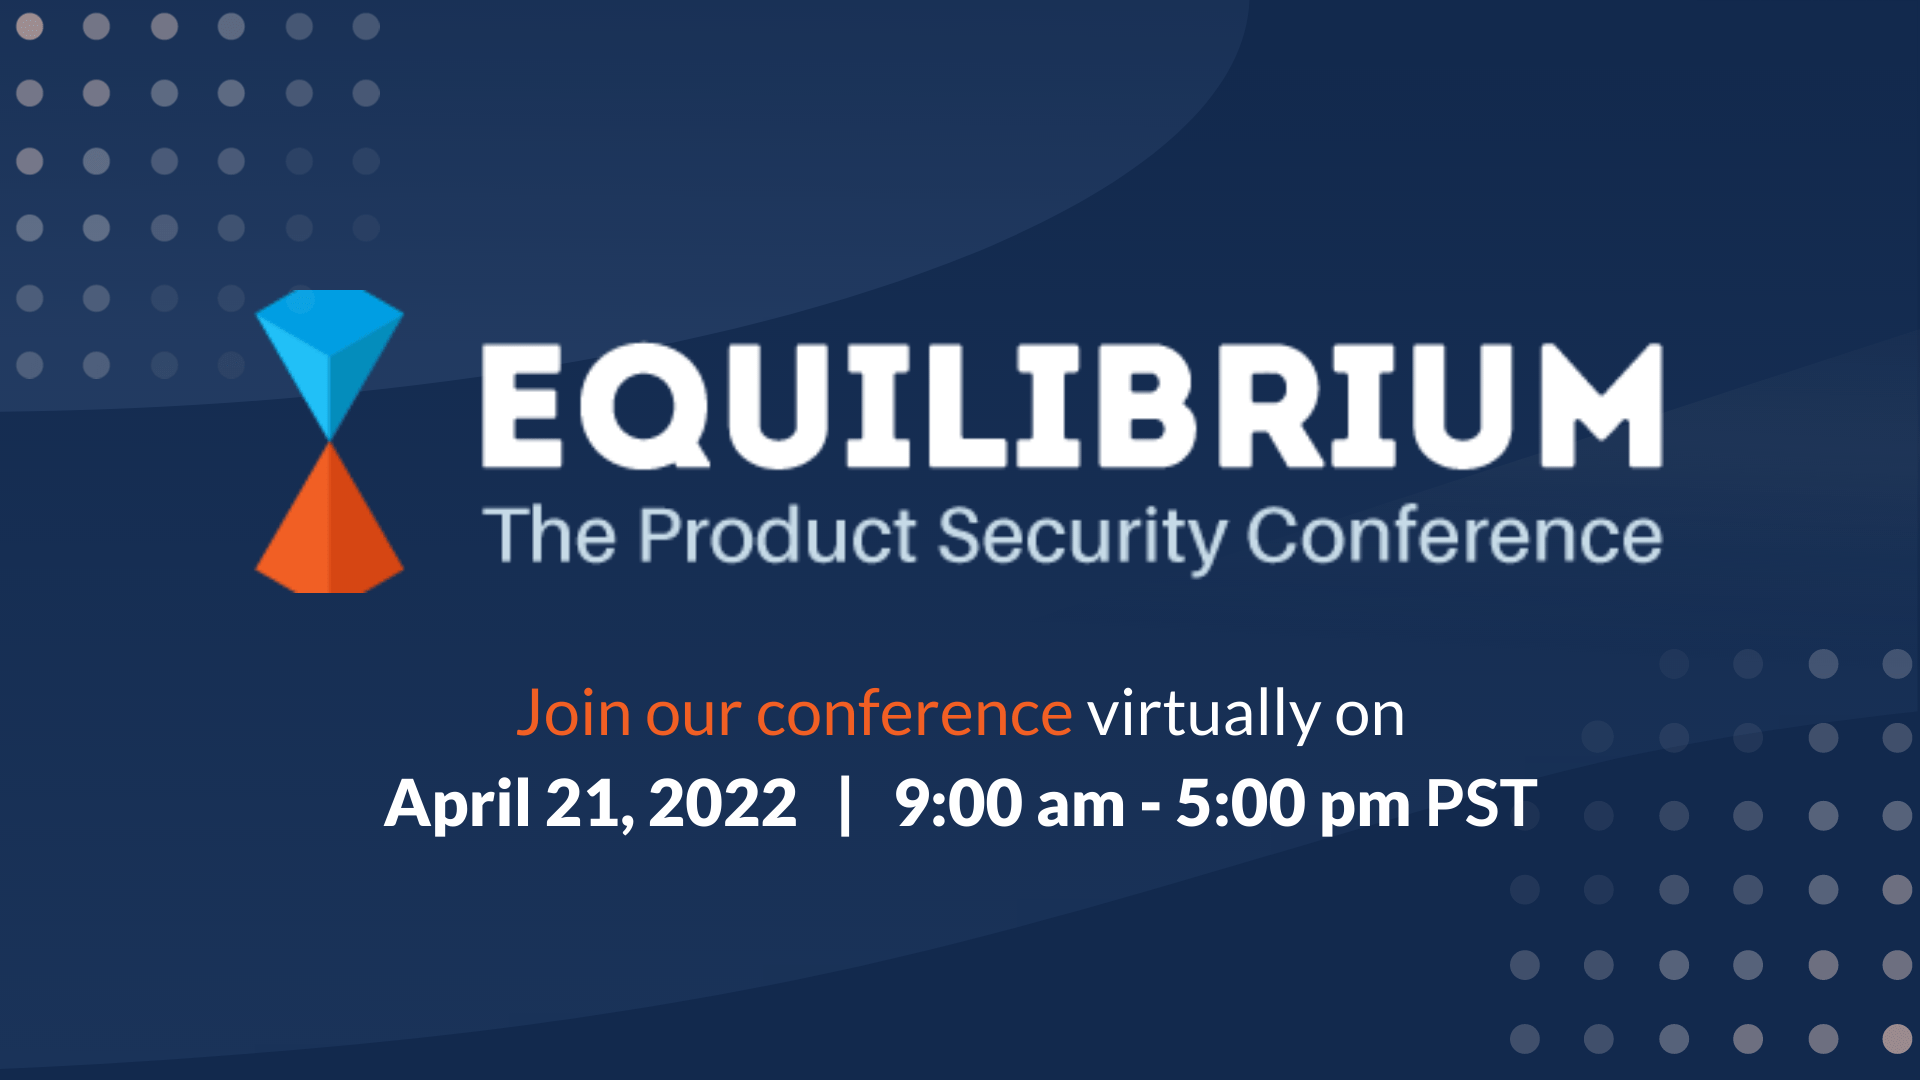 The Second Annual Equilibrium Conference Focused on Product Security